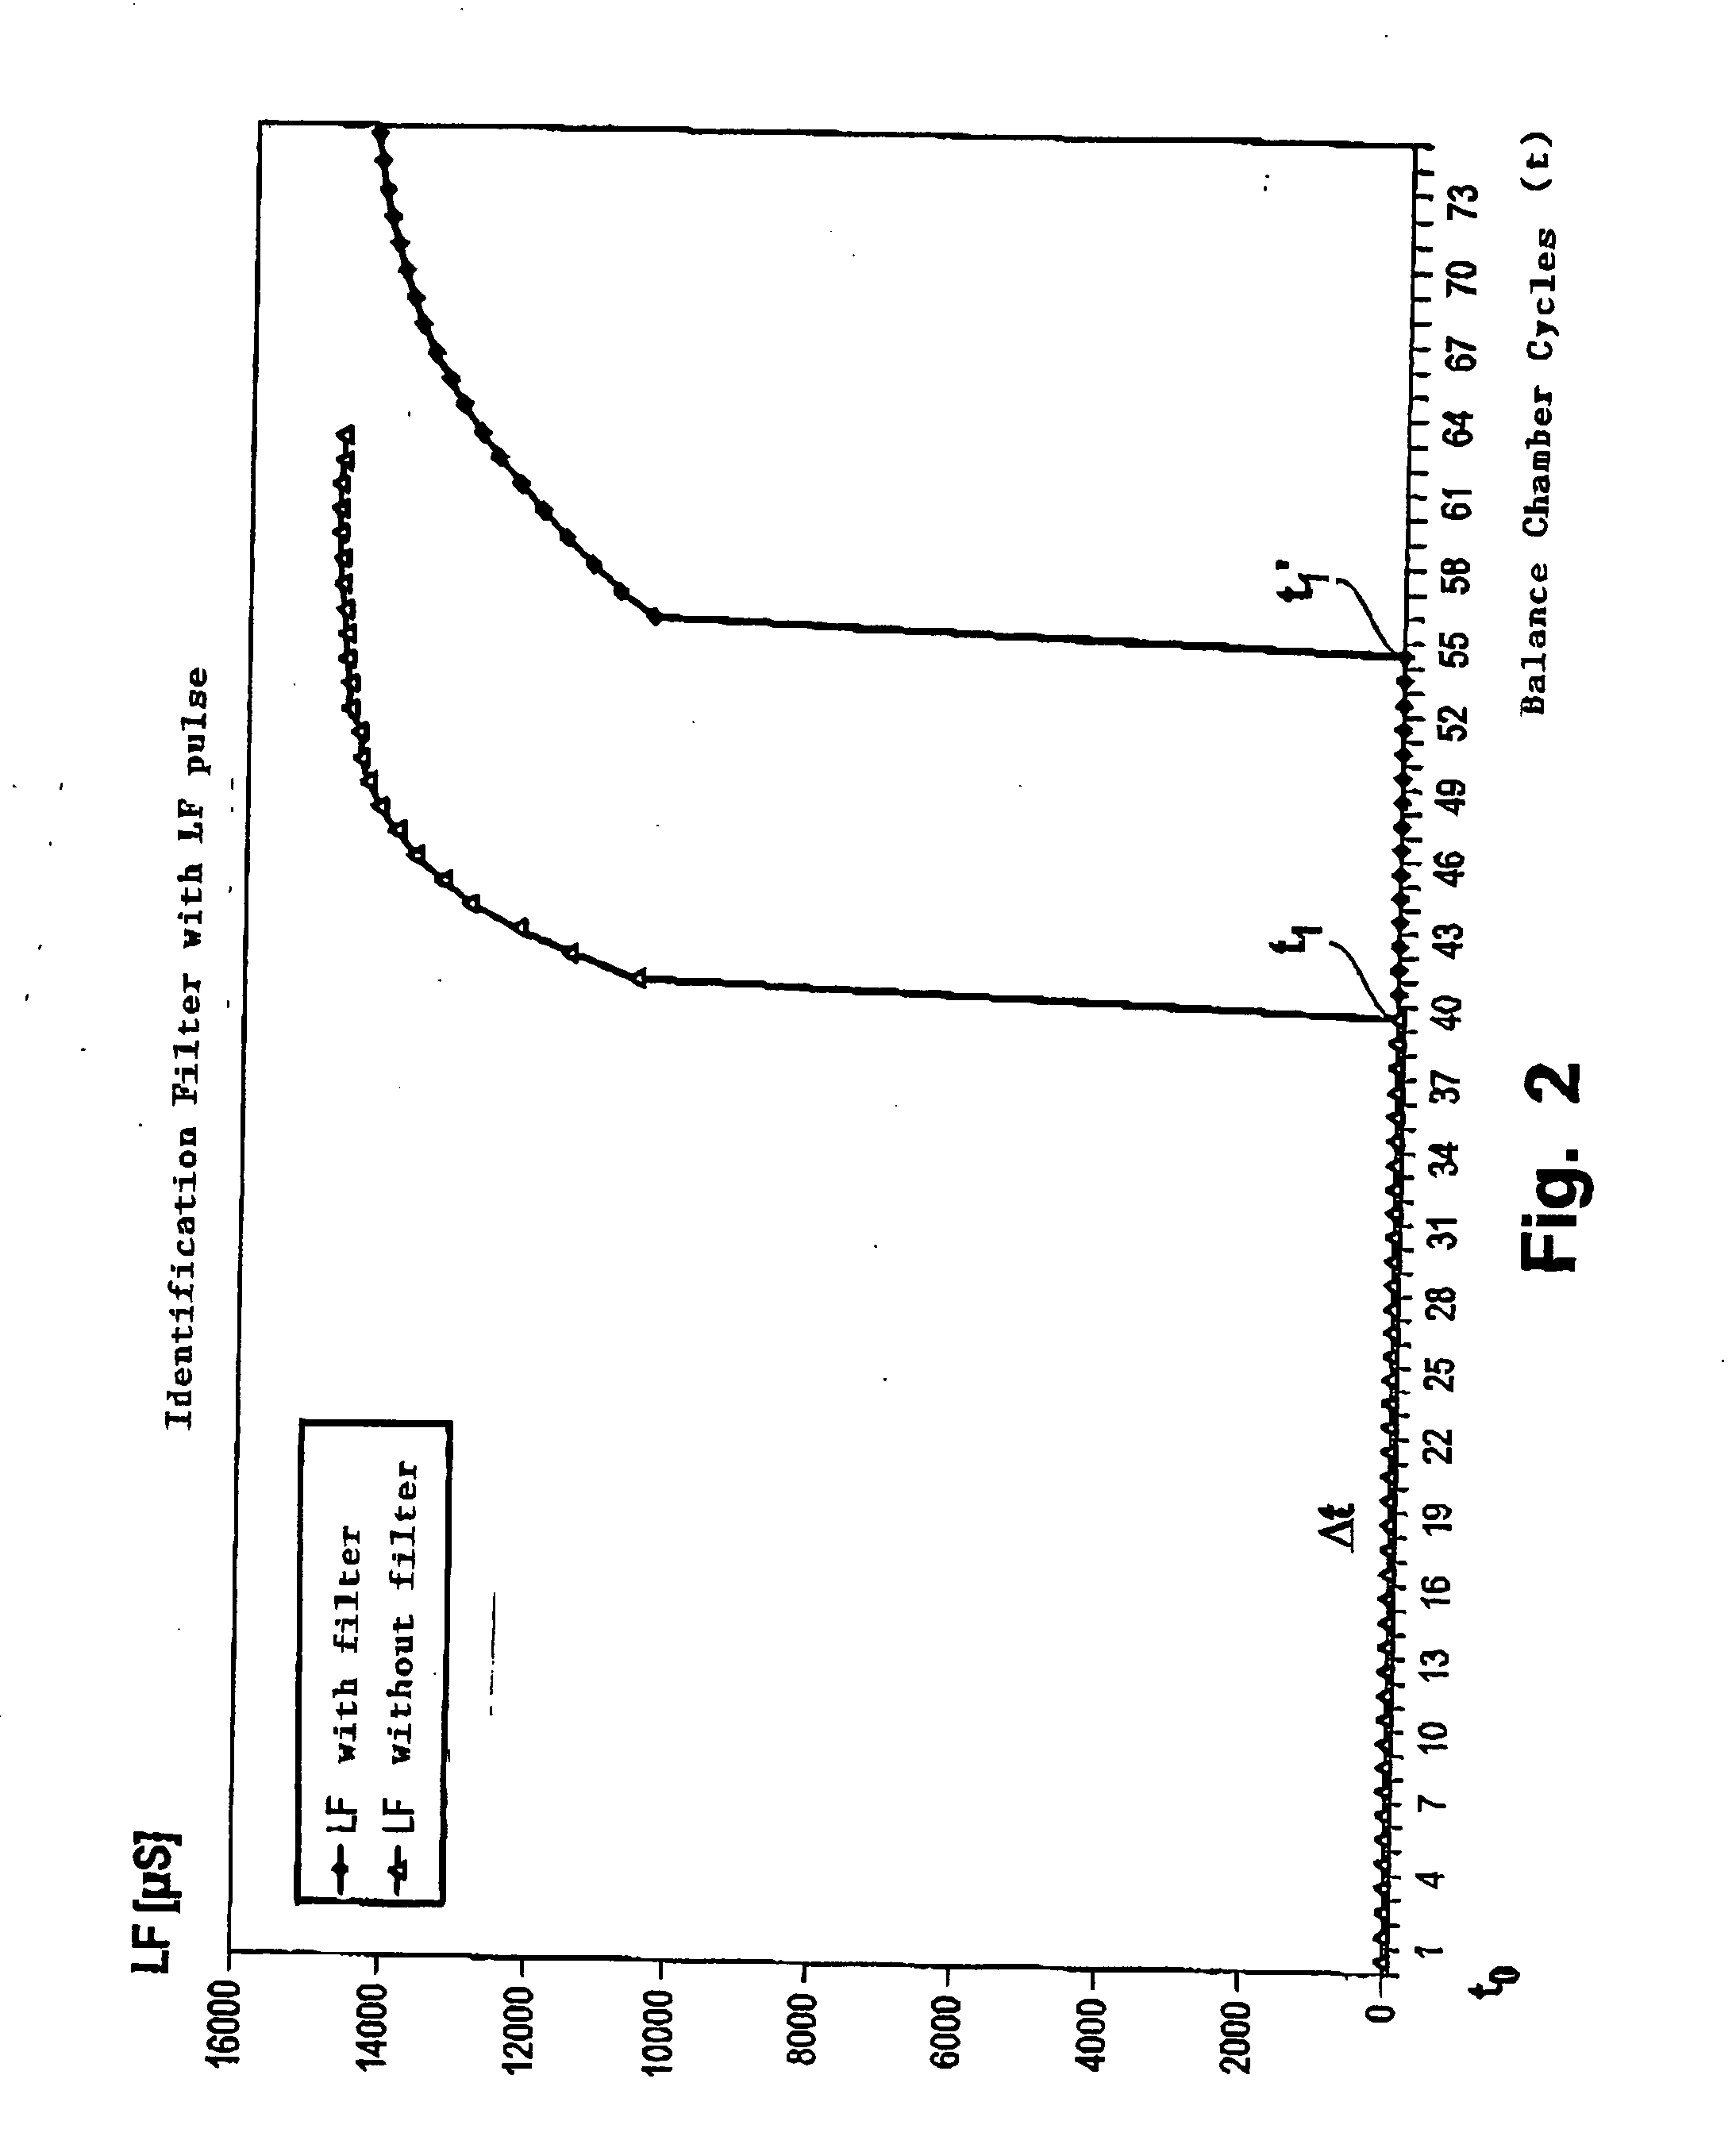 Apparatus for extracorporeal blood treatment with a device for checking a sterile filter, and method of checking a sterile filter of an extracorporeal blood treatment apparatus